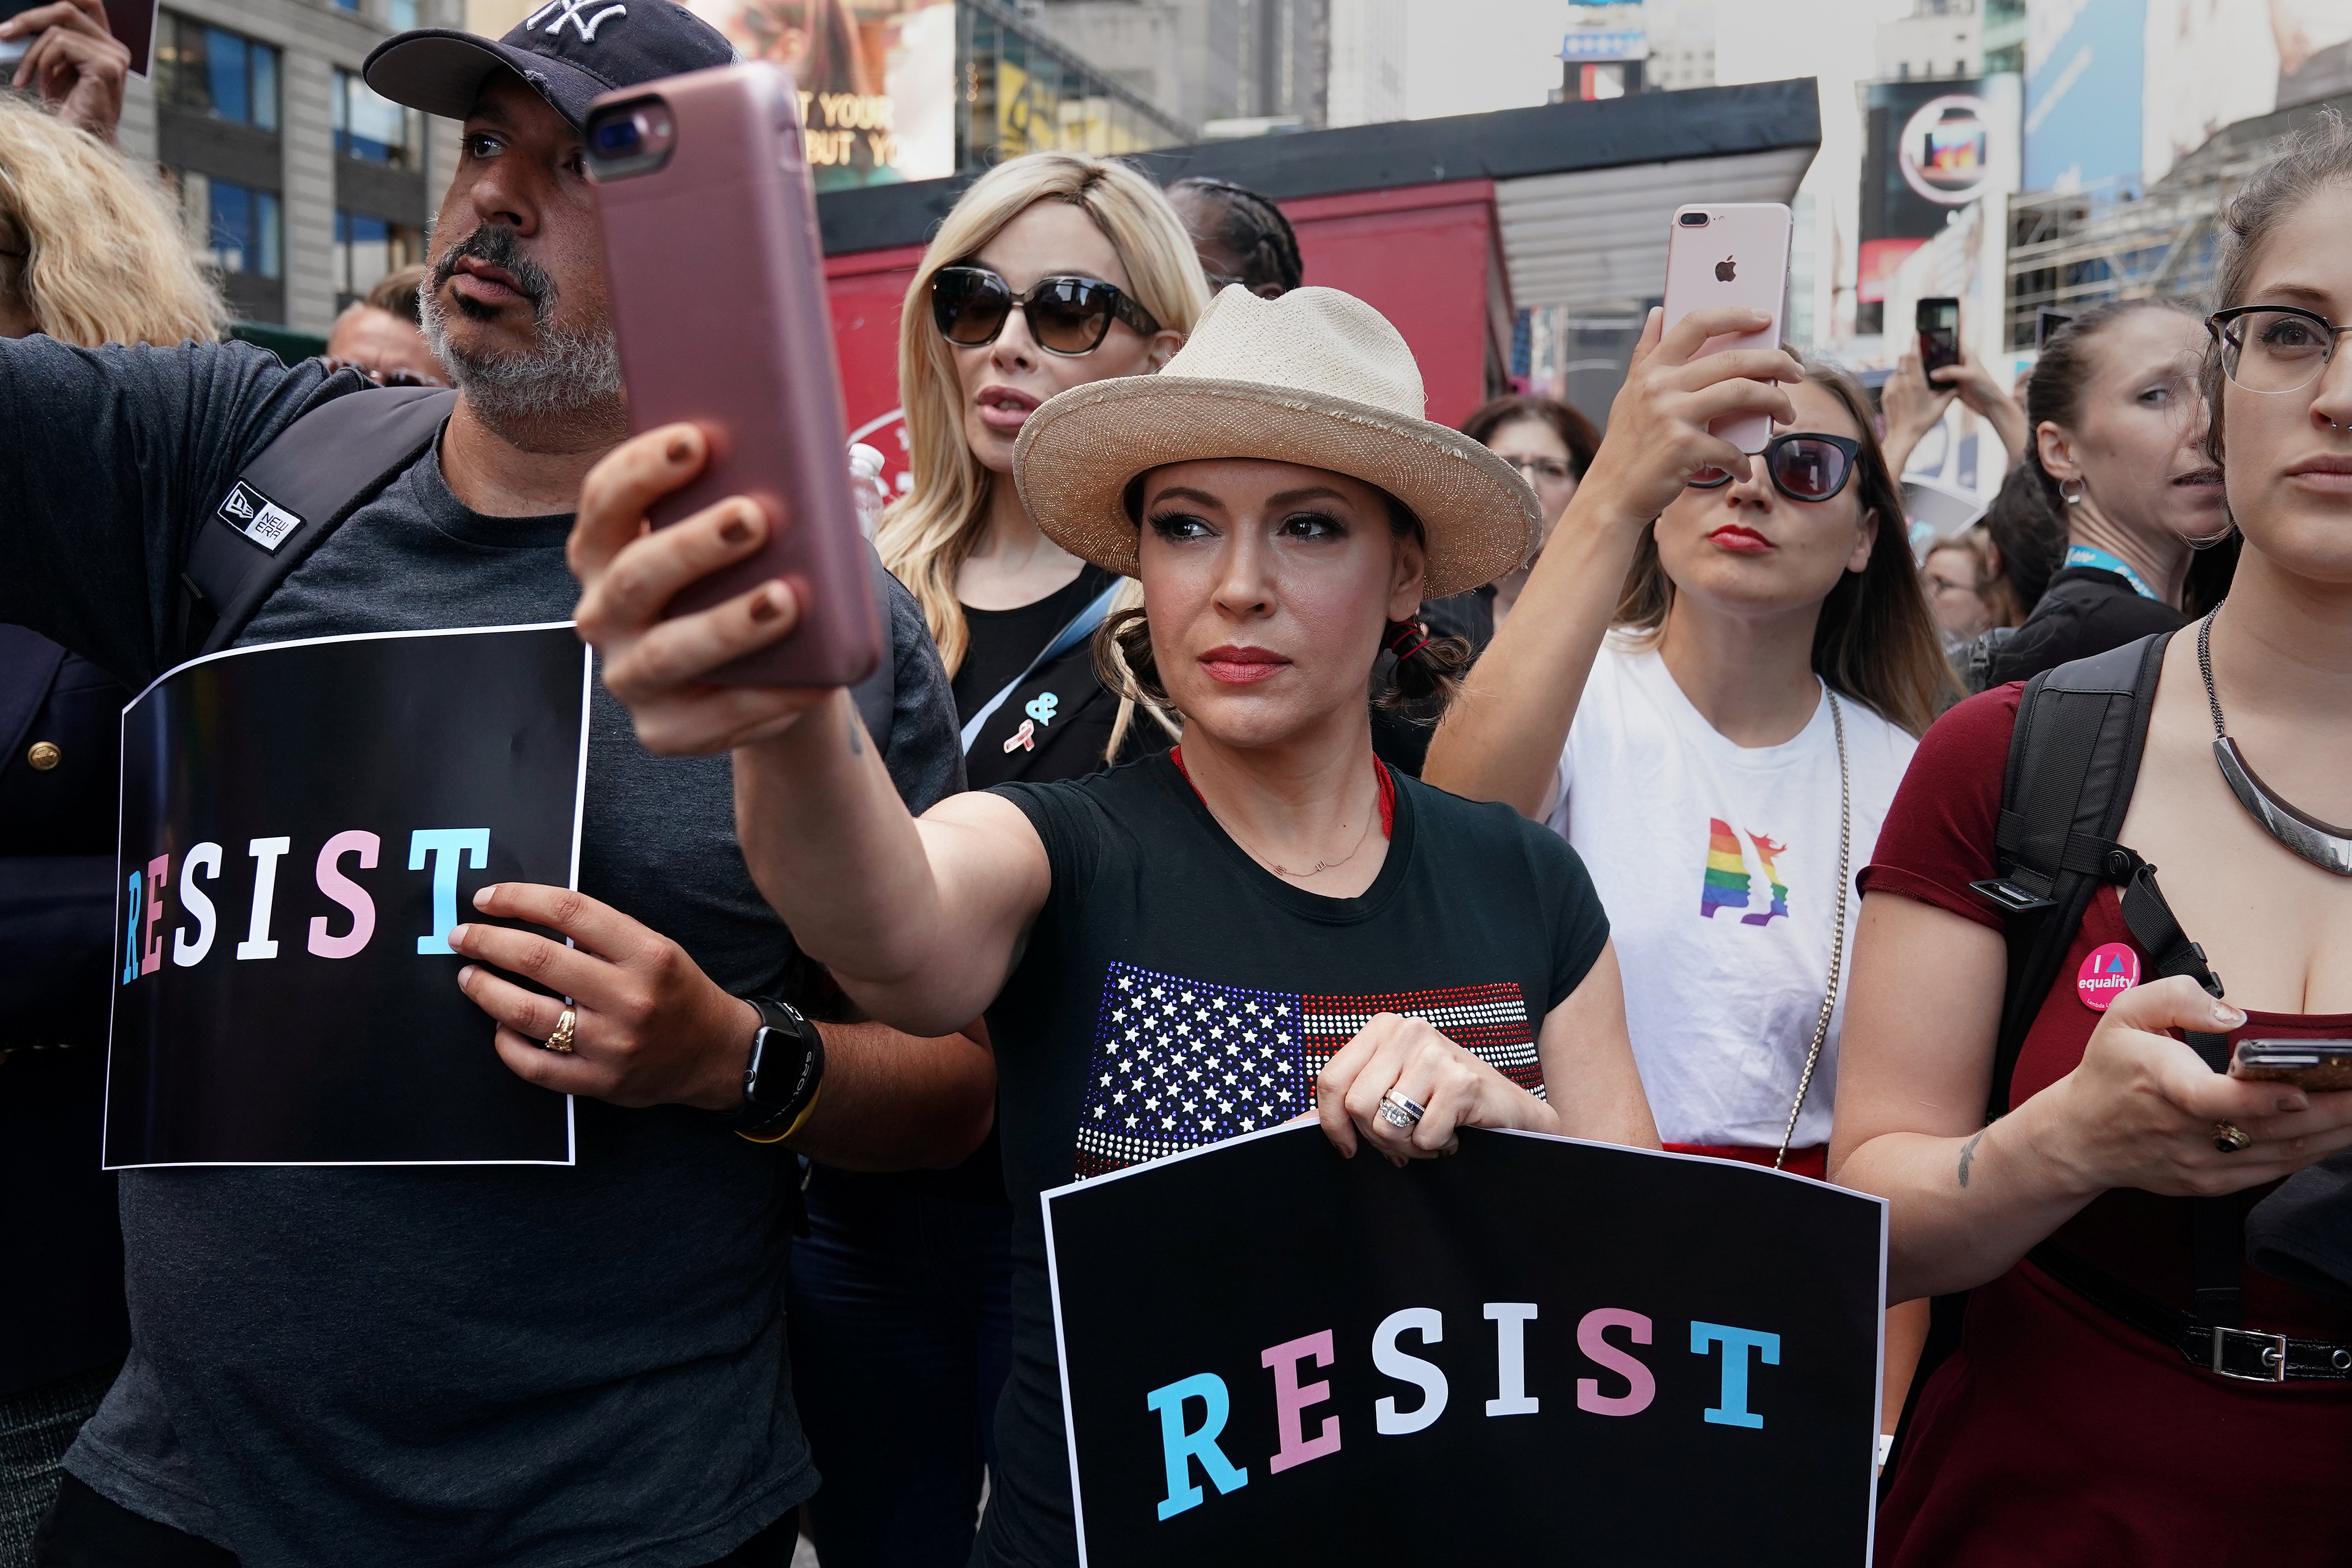 Actress Alyssa Milano attends a protest against U.S. President Donald Trump's announcement that he plans to reinstate a ban on transgender individuals from serving in any capacity in the U.S. military, in Times Square, in New York City, New York, U.S., July 26, 2017. REUTERS/Carlo Allegri